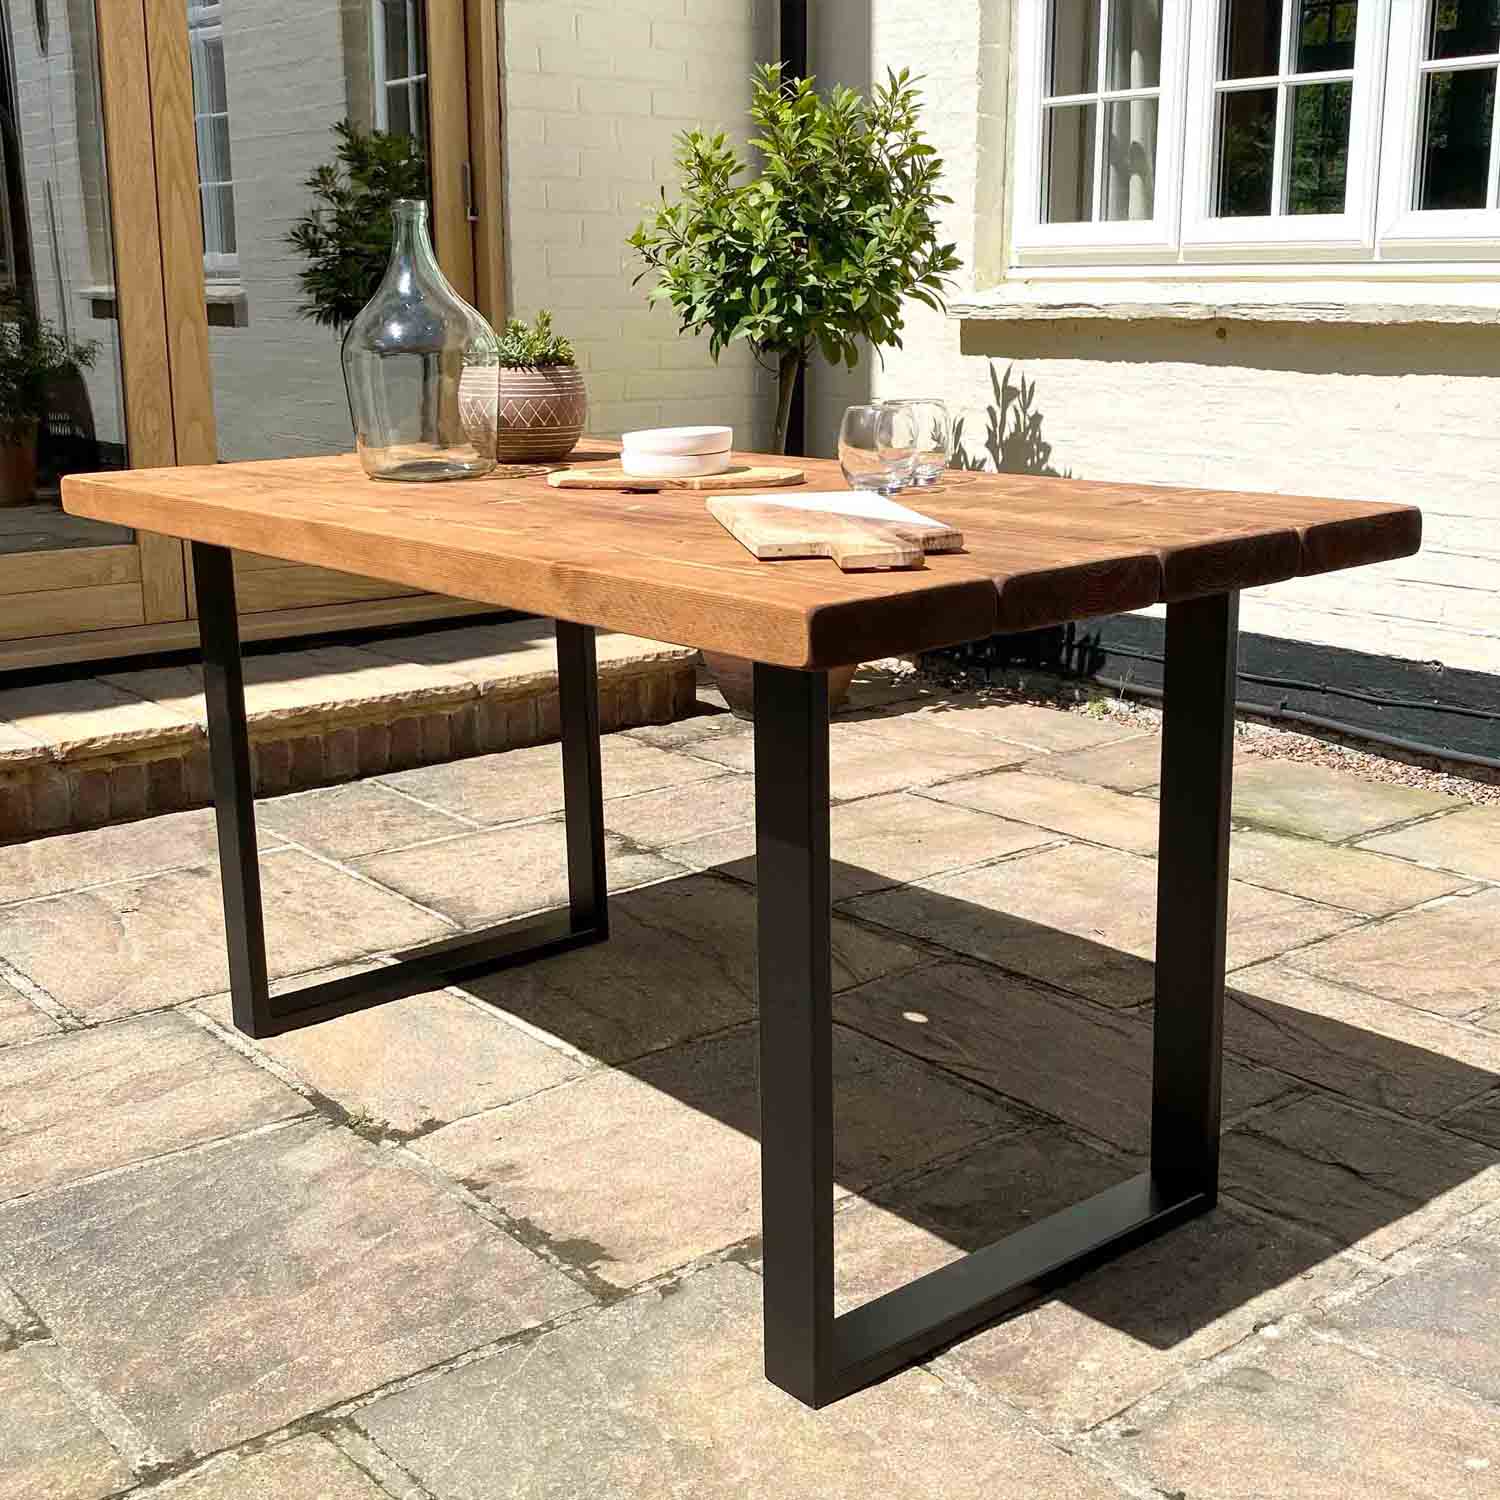 Garden Table Set in Outdoor Dining Area